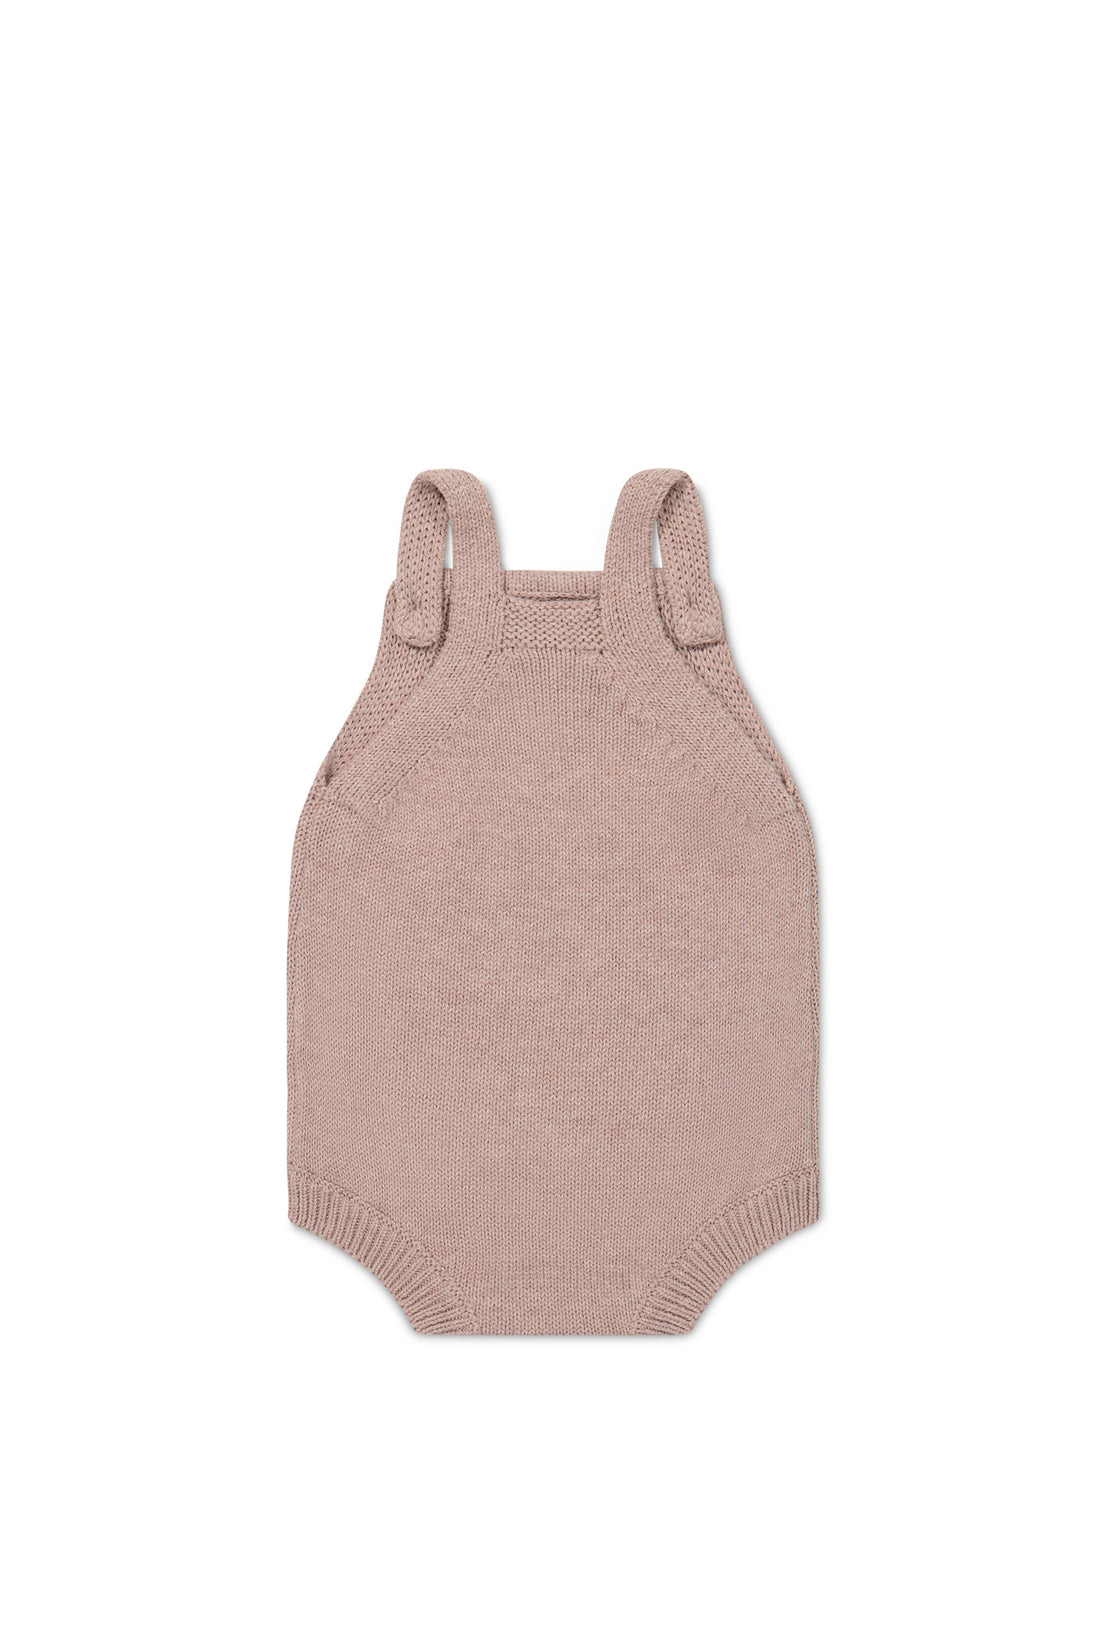 Ginny Playsuit - Shell Marle Childrens Playsuit from Jamie Kay USA